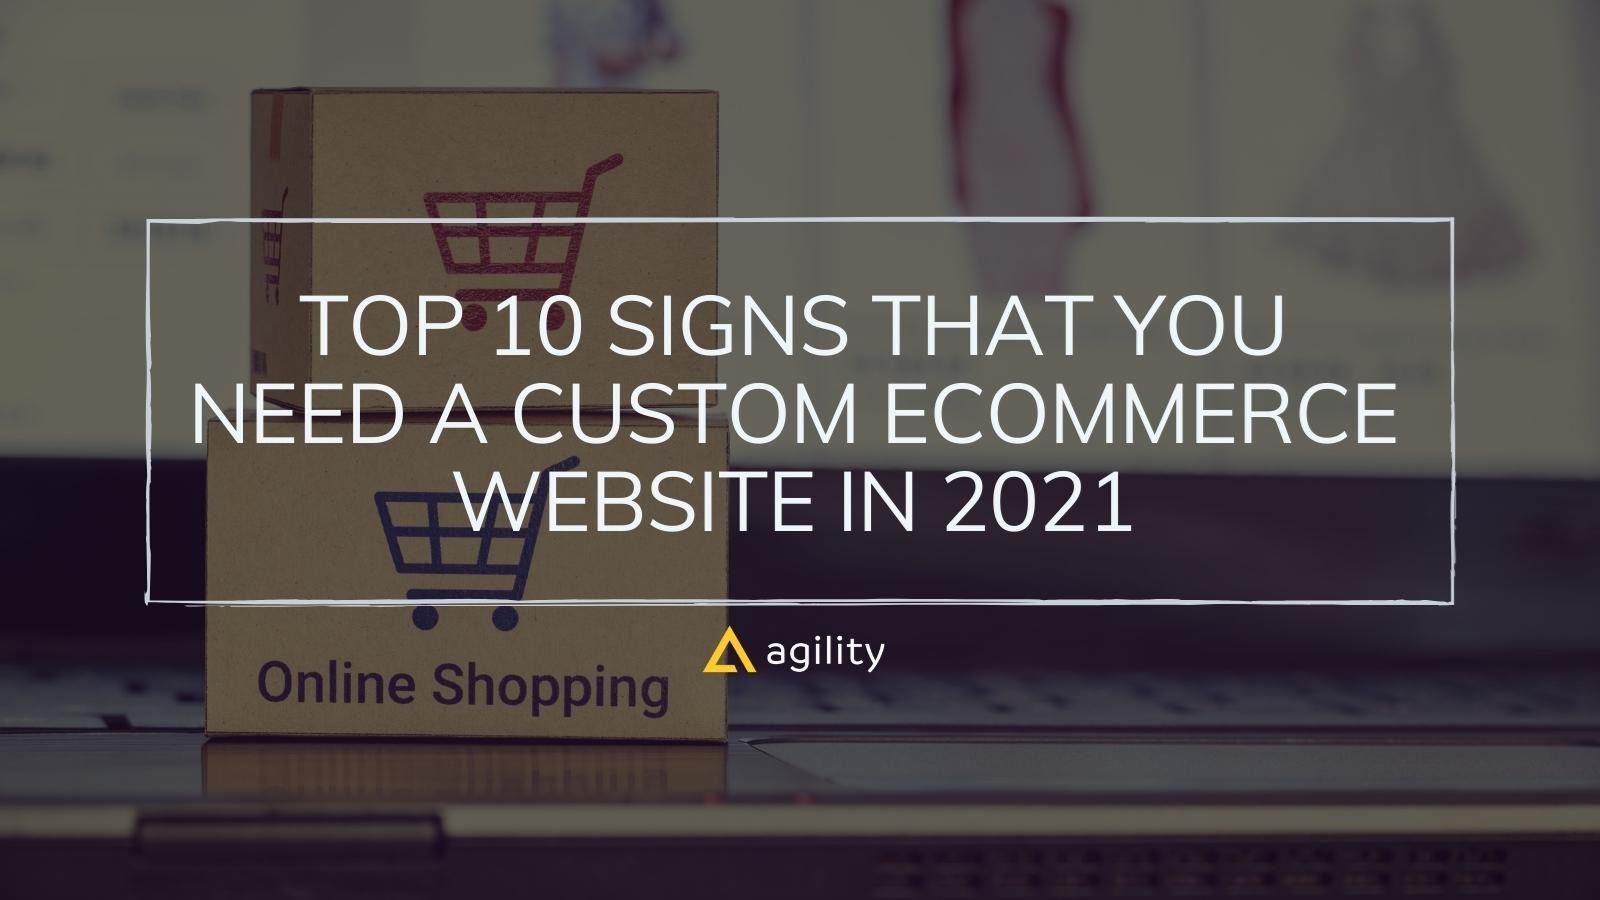 Top 10 Signs that You Need a Custom E-Commerce Website in 2021